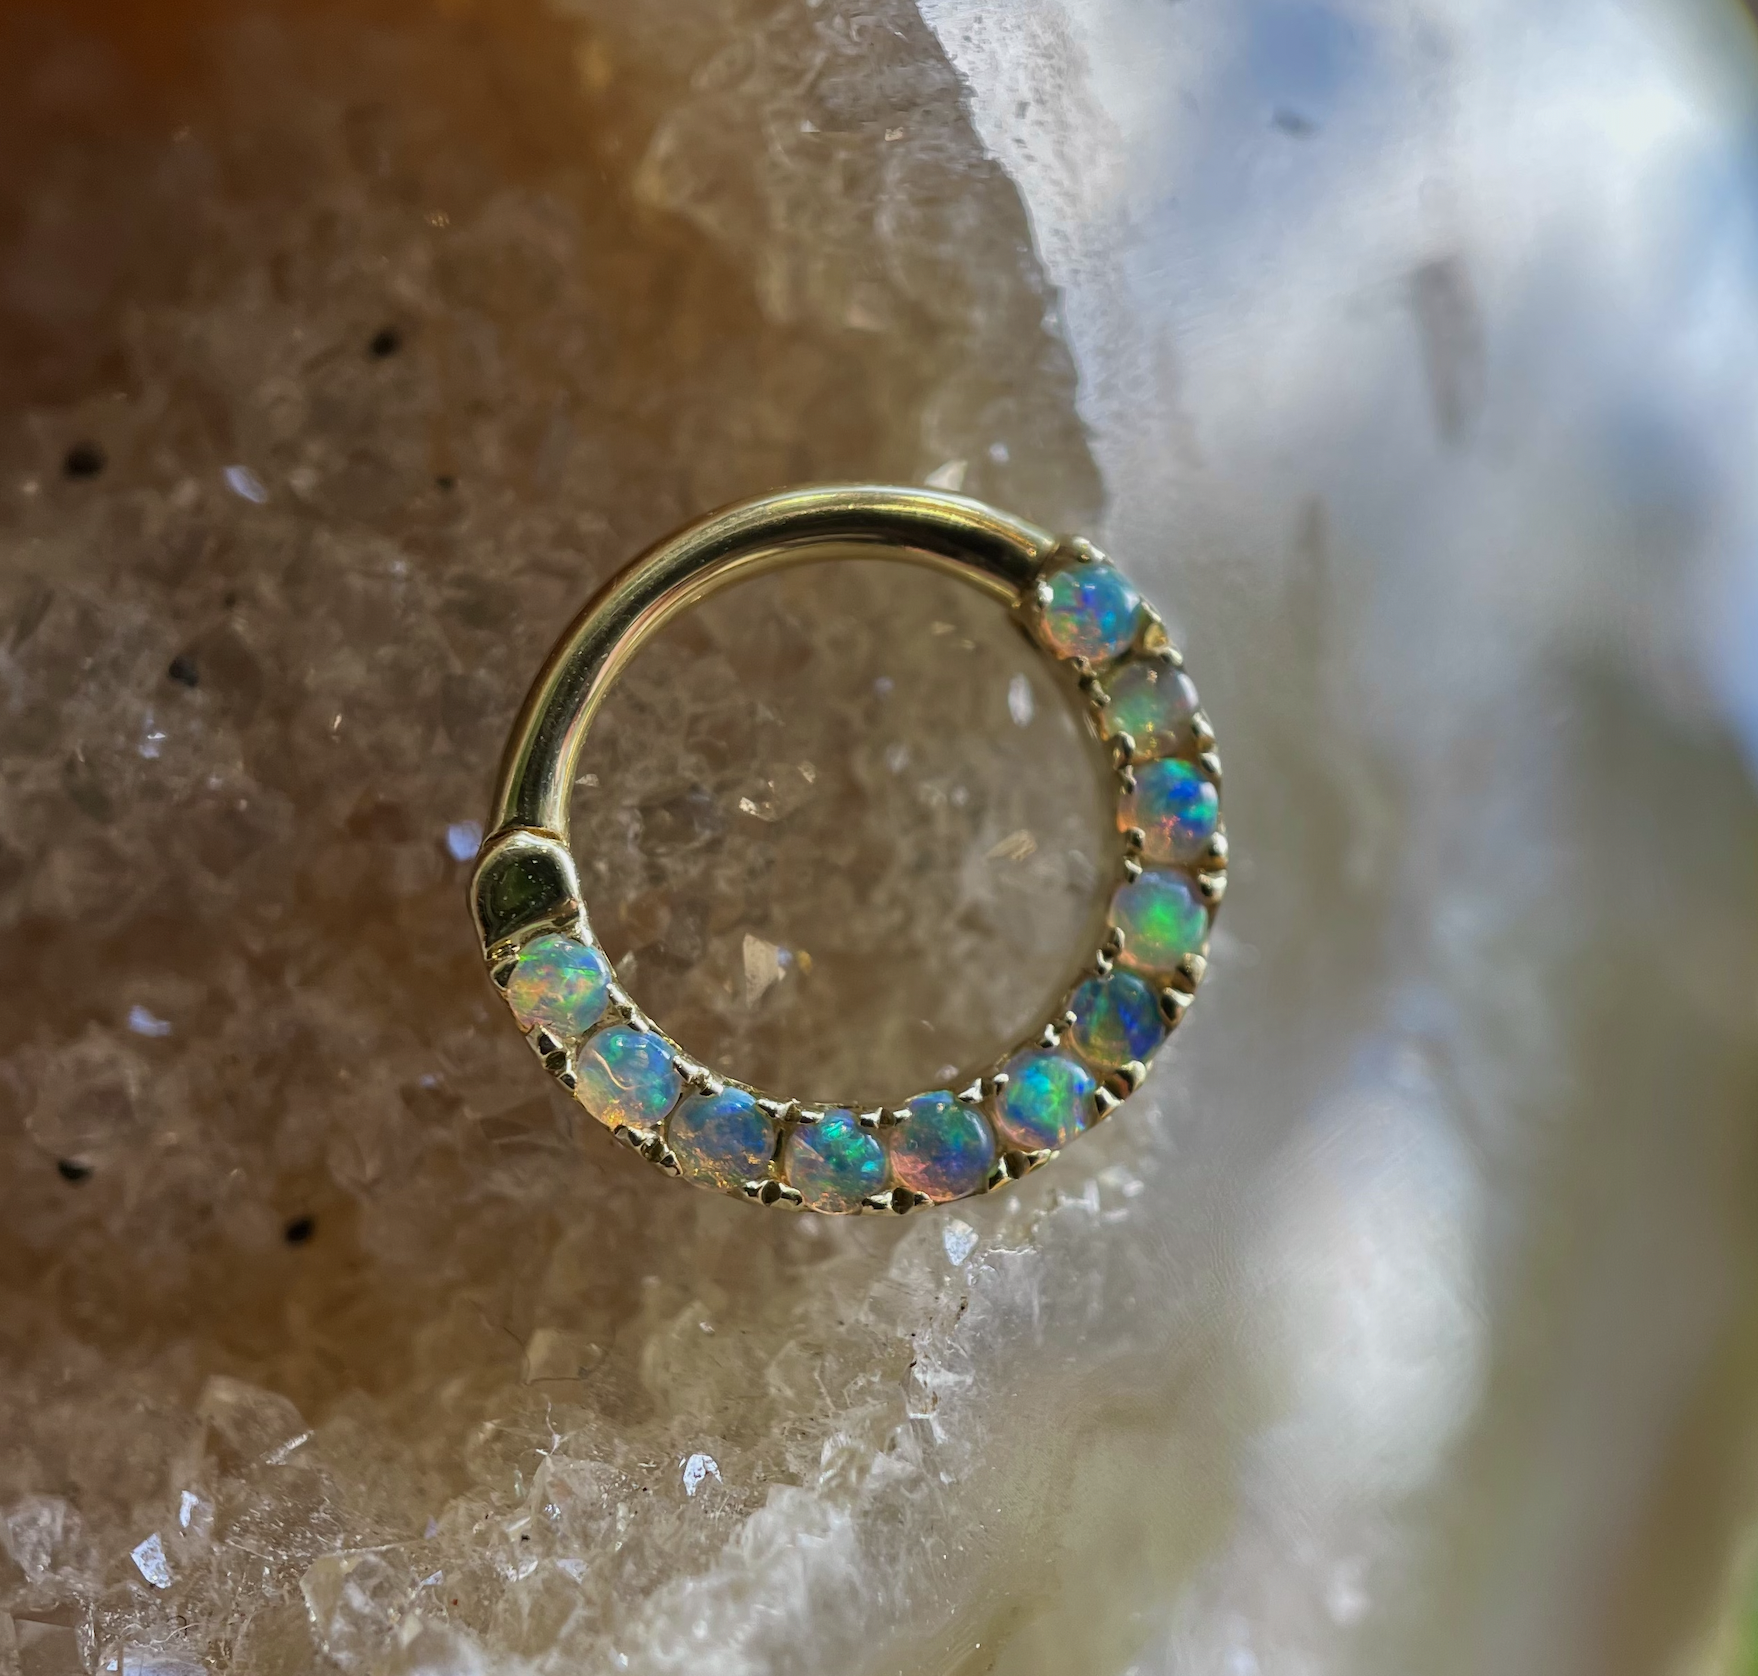 16g 5/16 "Eternity" Clicker with White Opal by Maria Tash